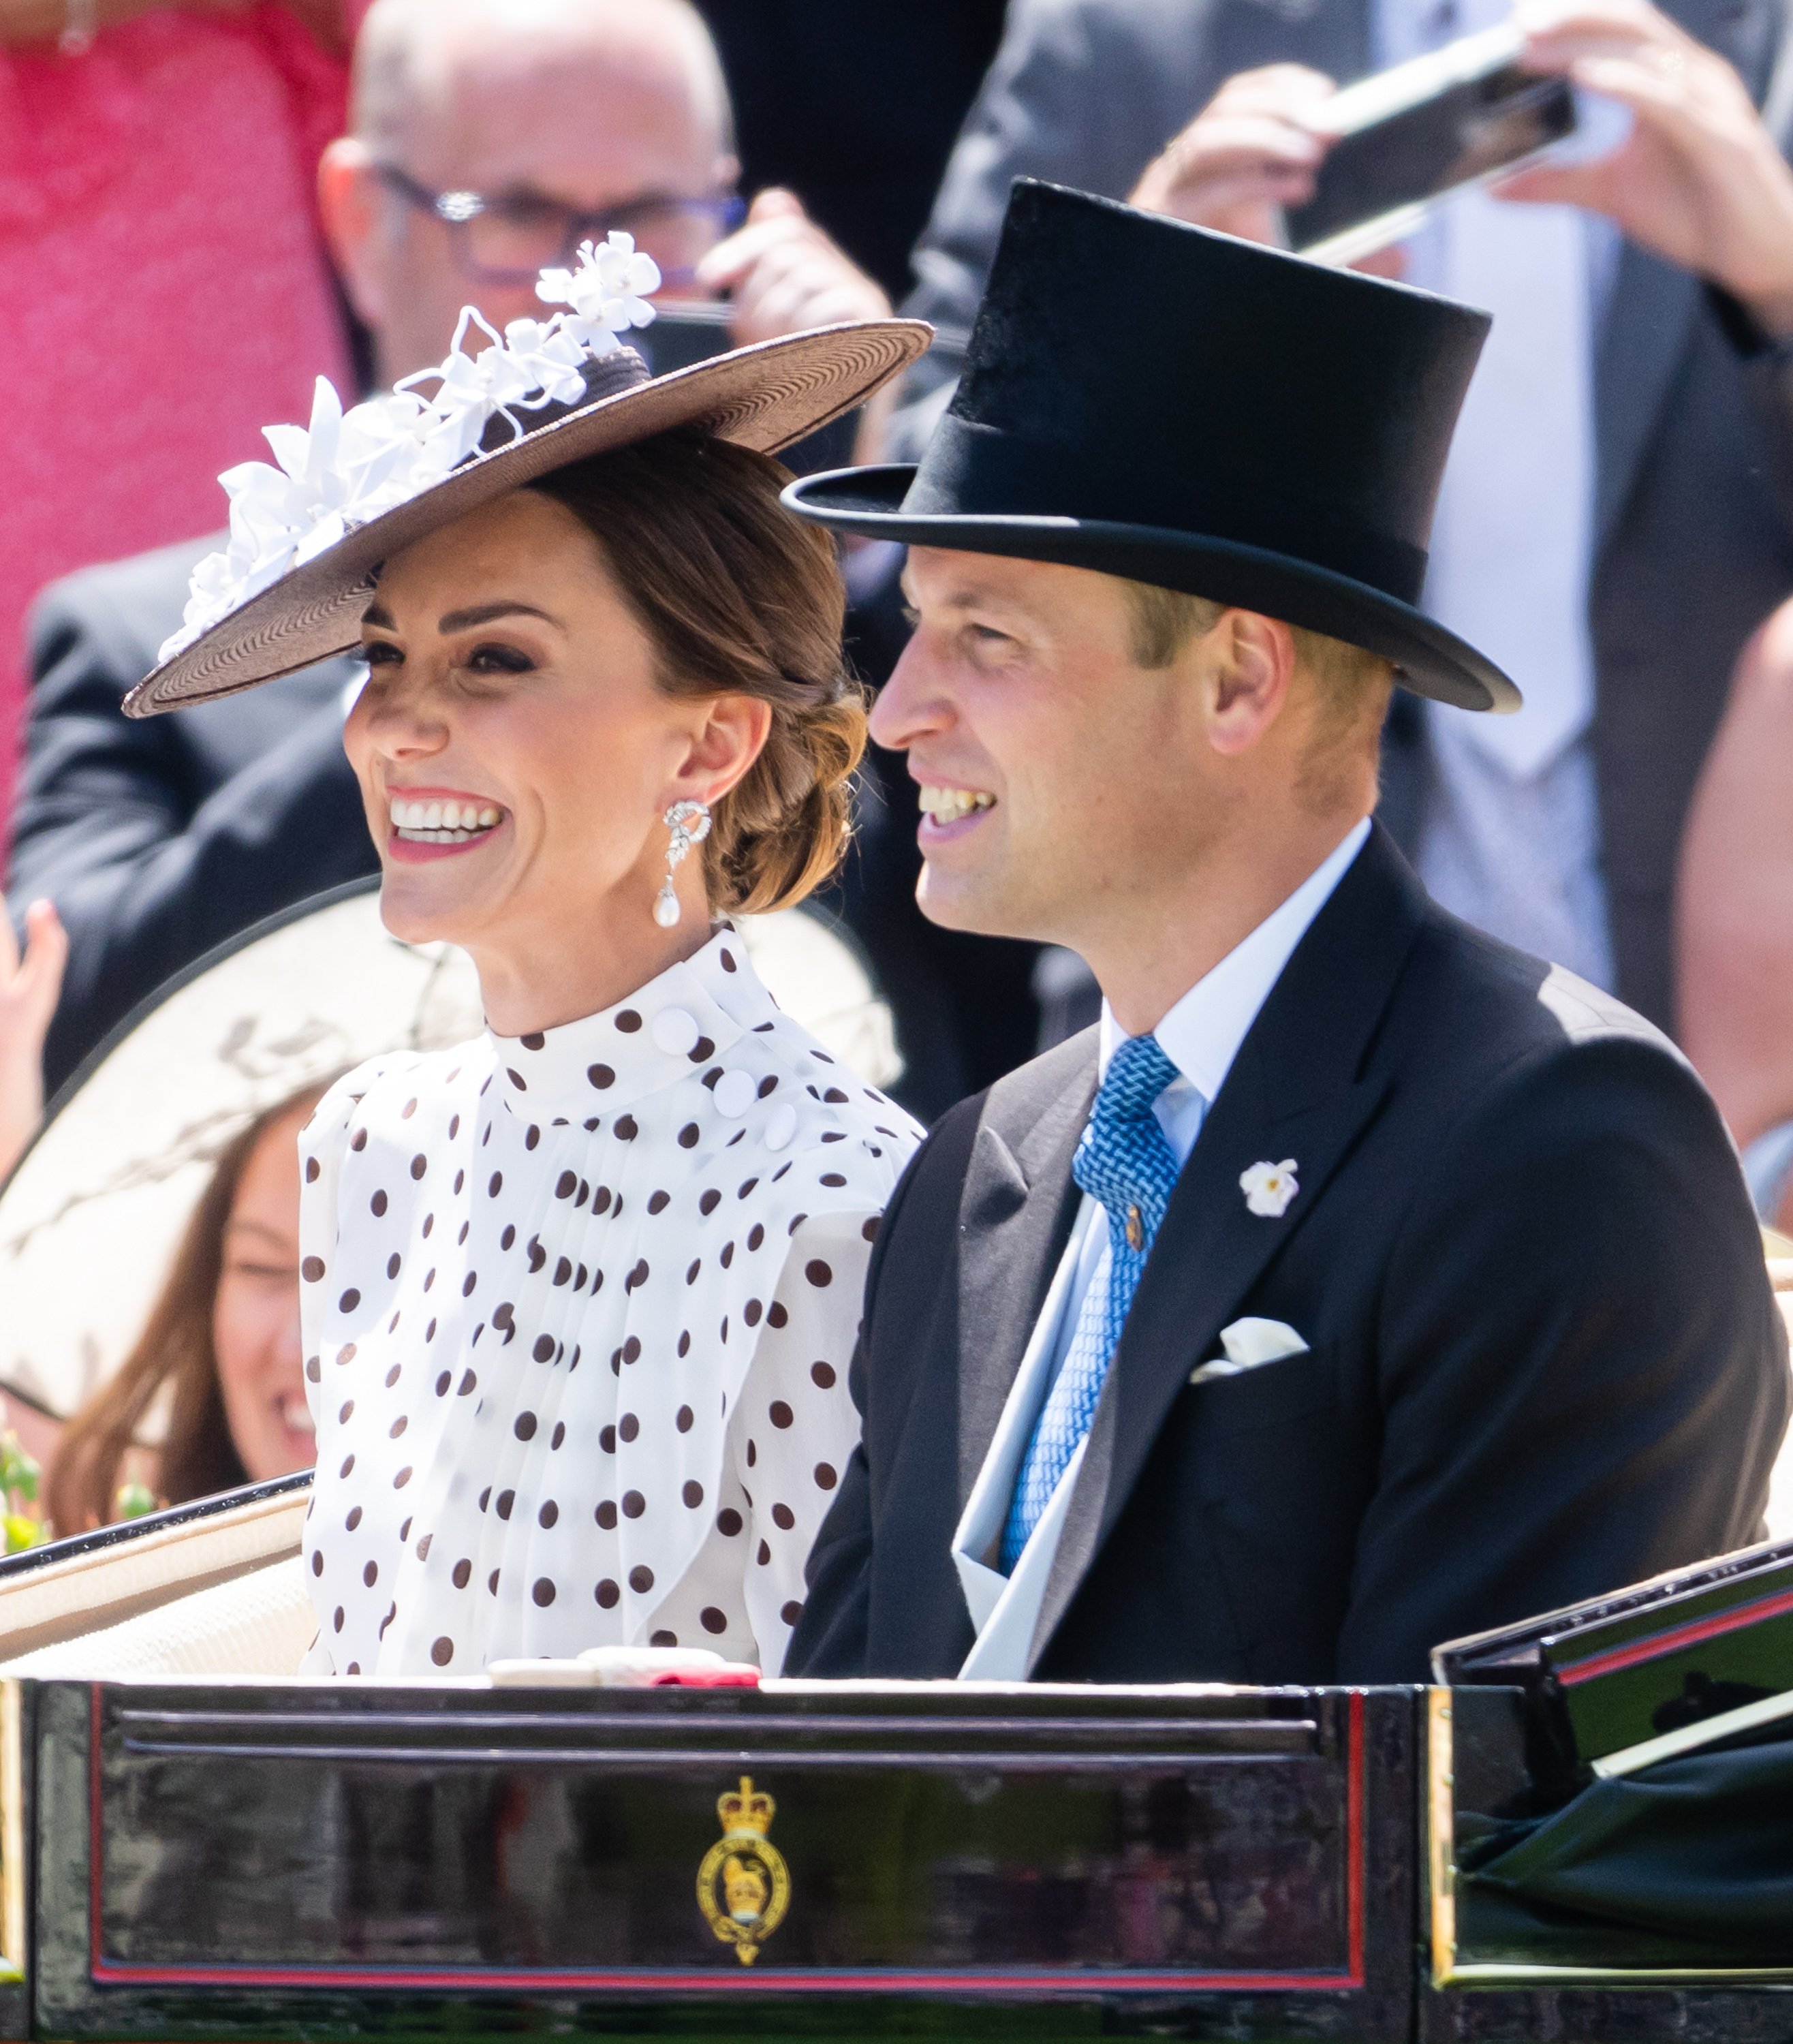 Catherine, Duchess of Cambridge and Prince William, Duke of Cambridge attend Royal Ascot at Ascot Racecourse on June 17, 2022 in Ascot, England. | Source: Getty Images